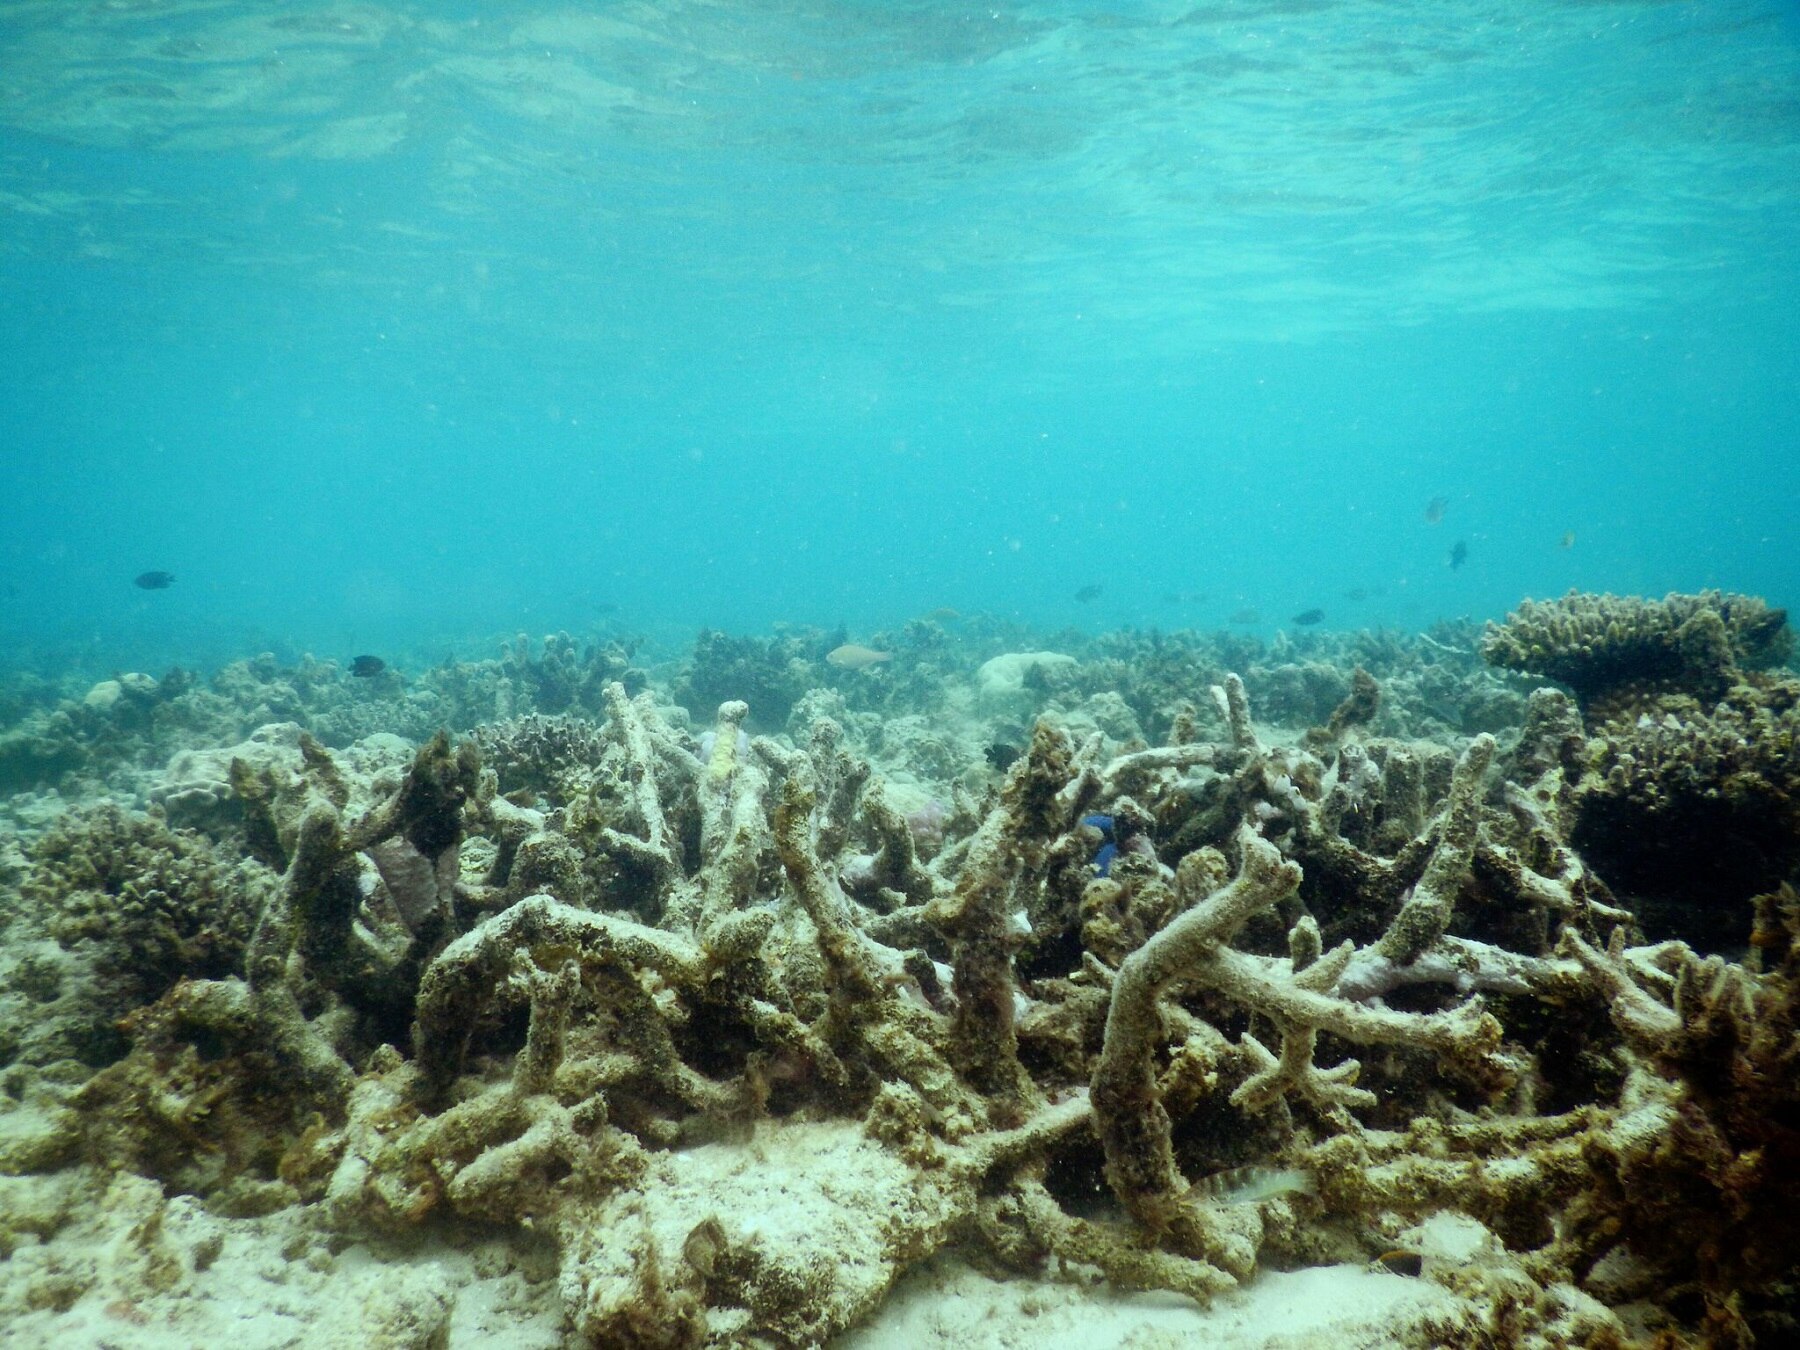 Degraded coral reefs at Lizard Island, Northern Great Barrier Reef 